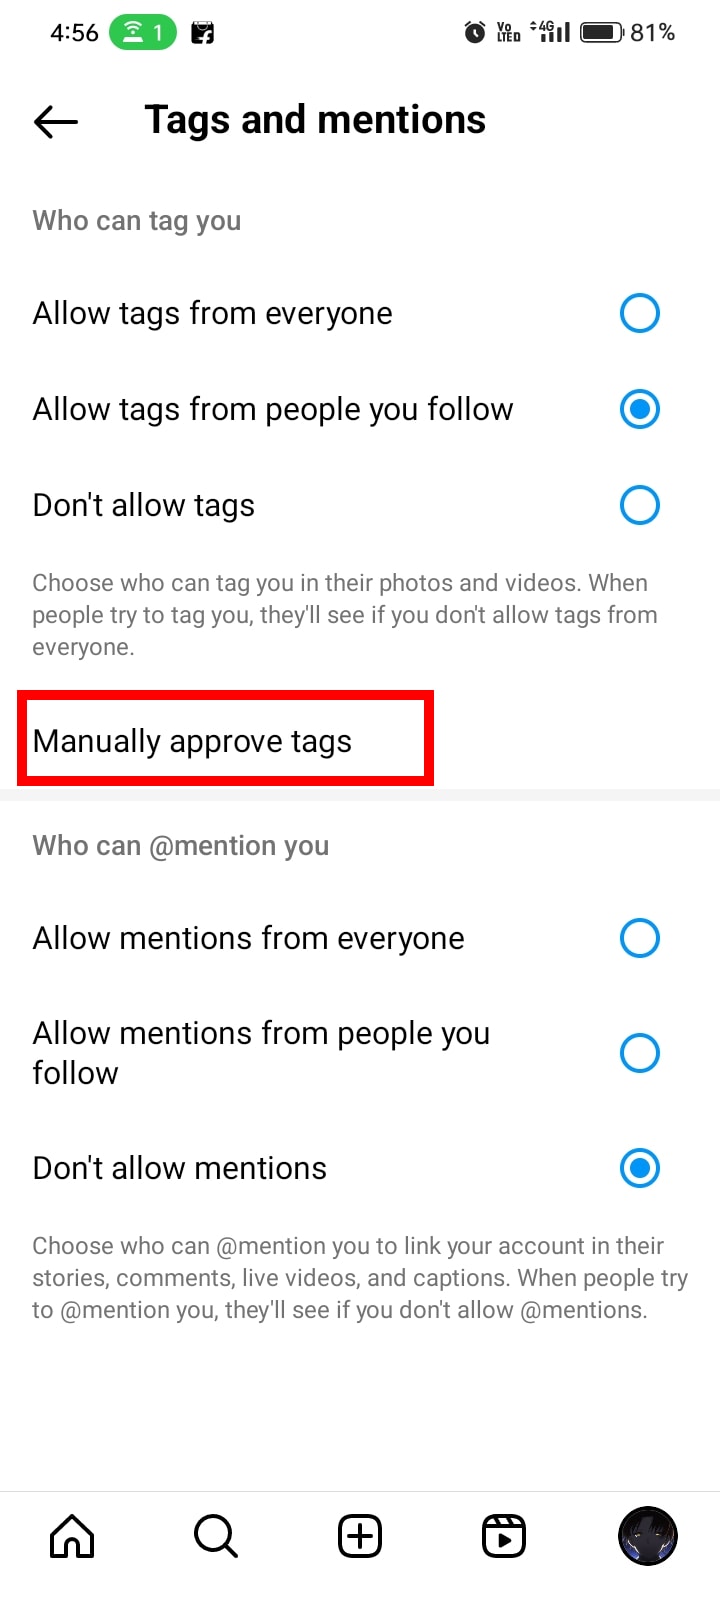 Tap on Manually approve tags.